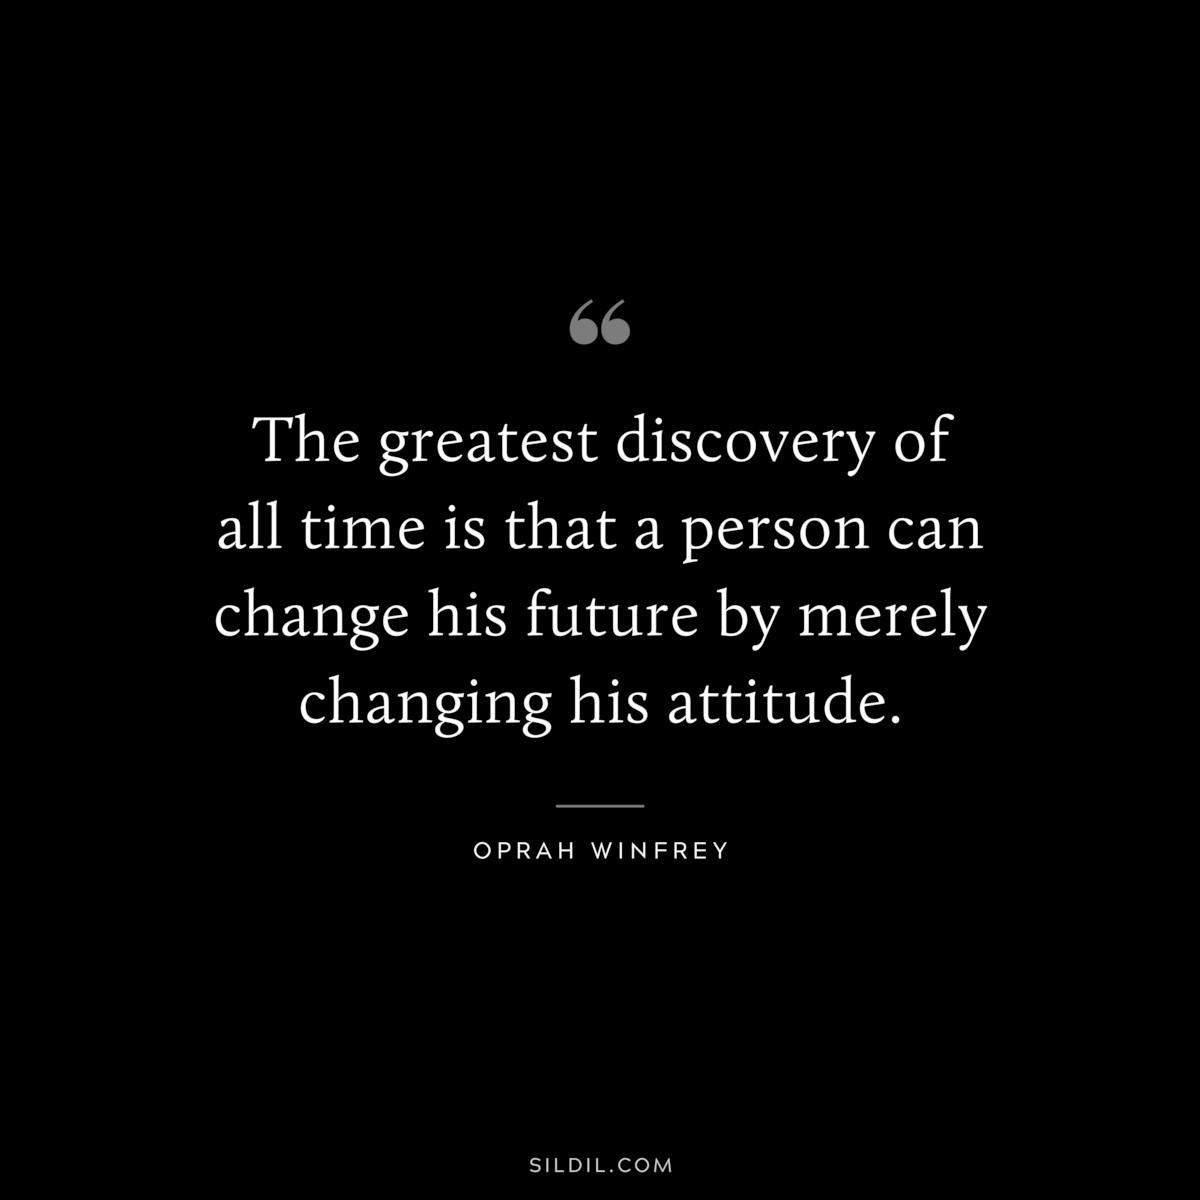 The greatest discovery of all time is that a person can change his future by merely changing his attitude. ― Oprah Winfrey